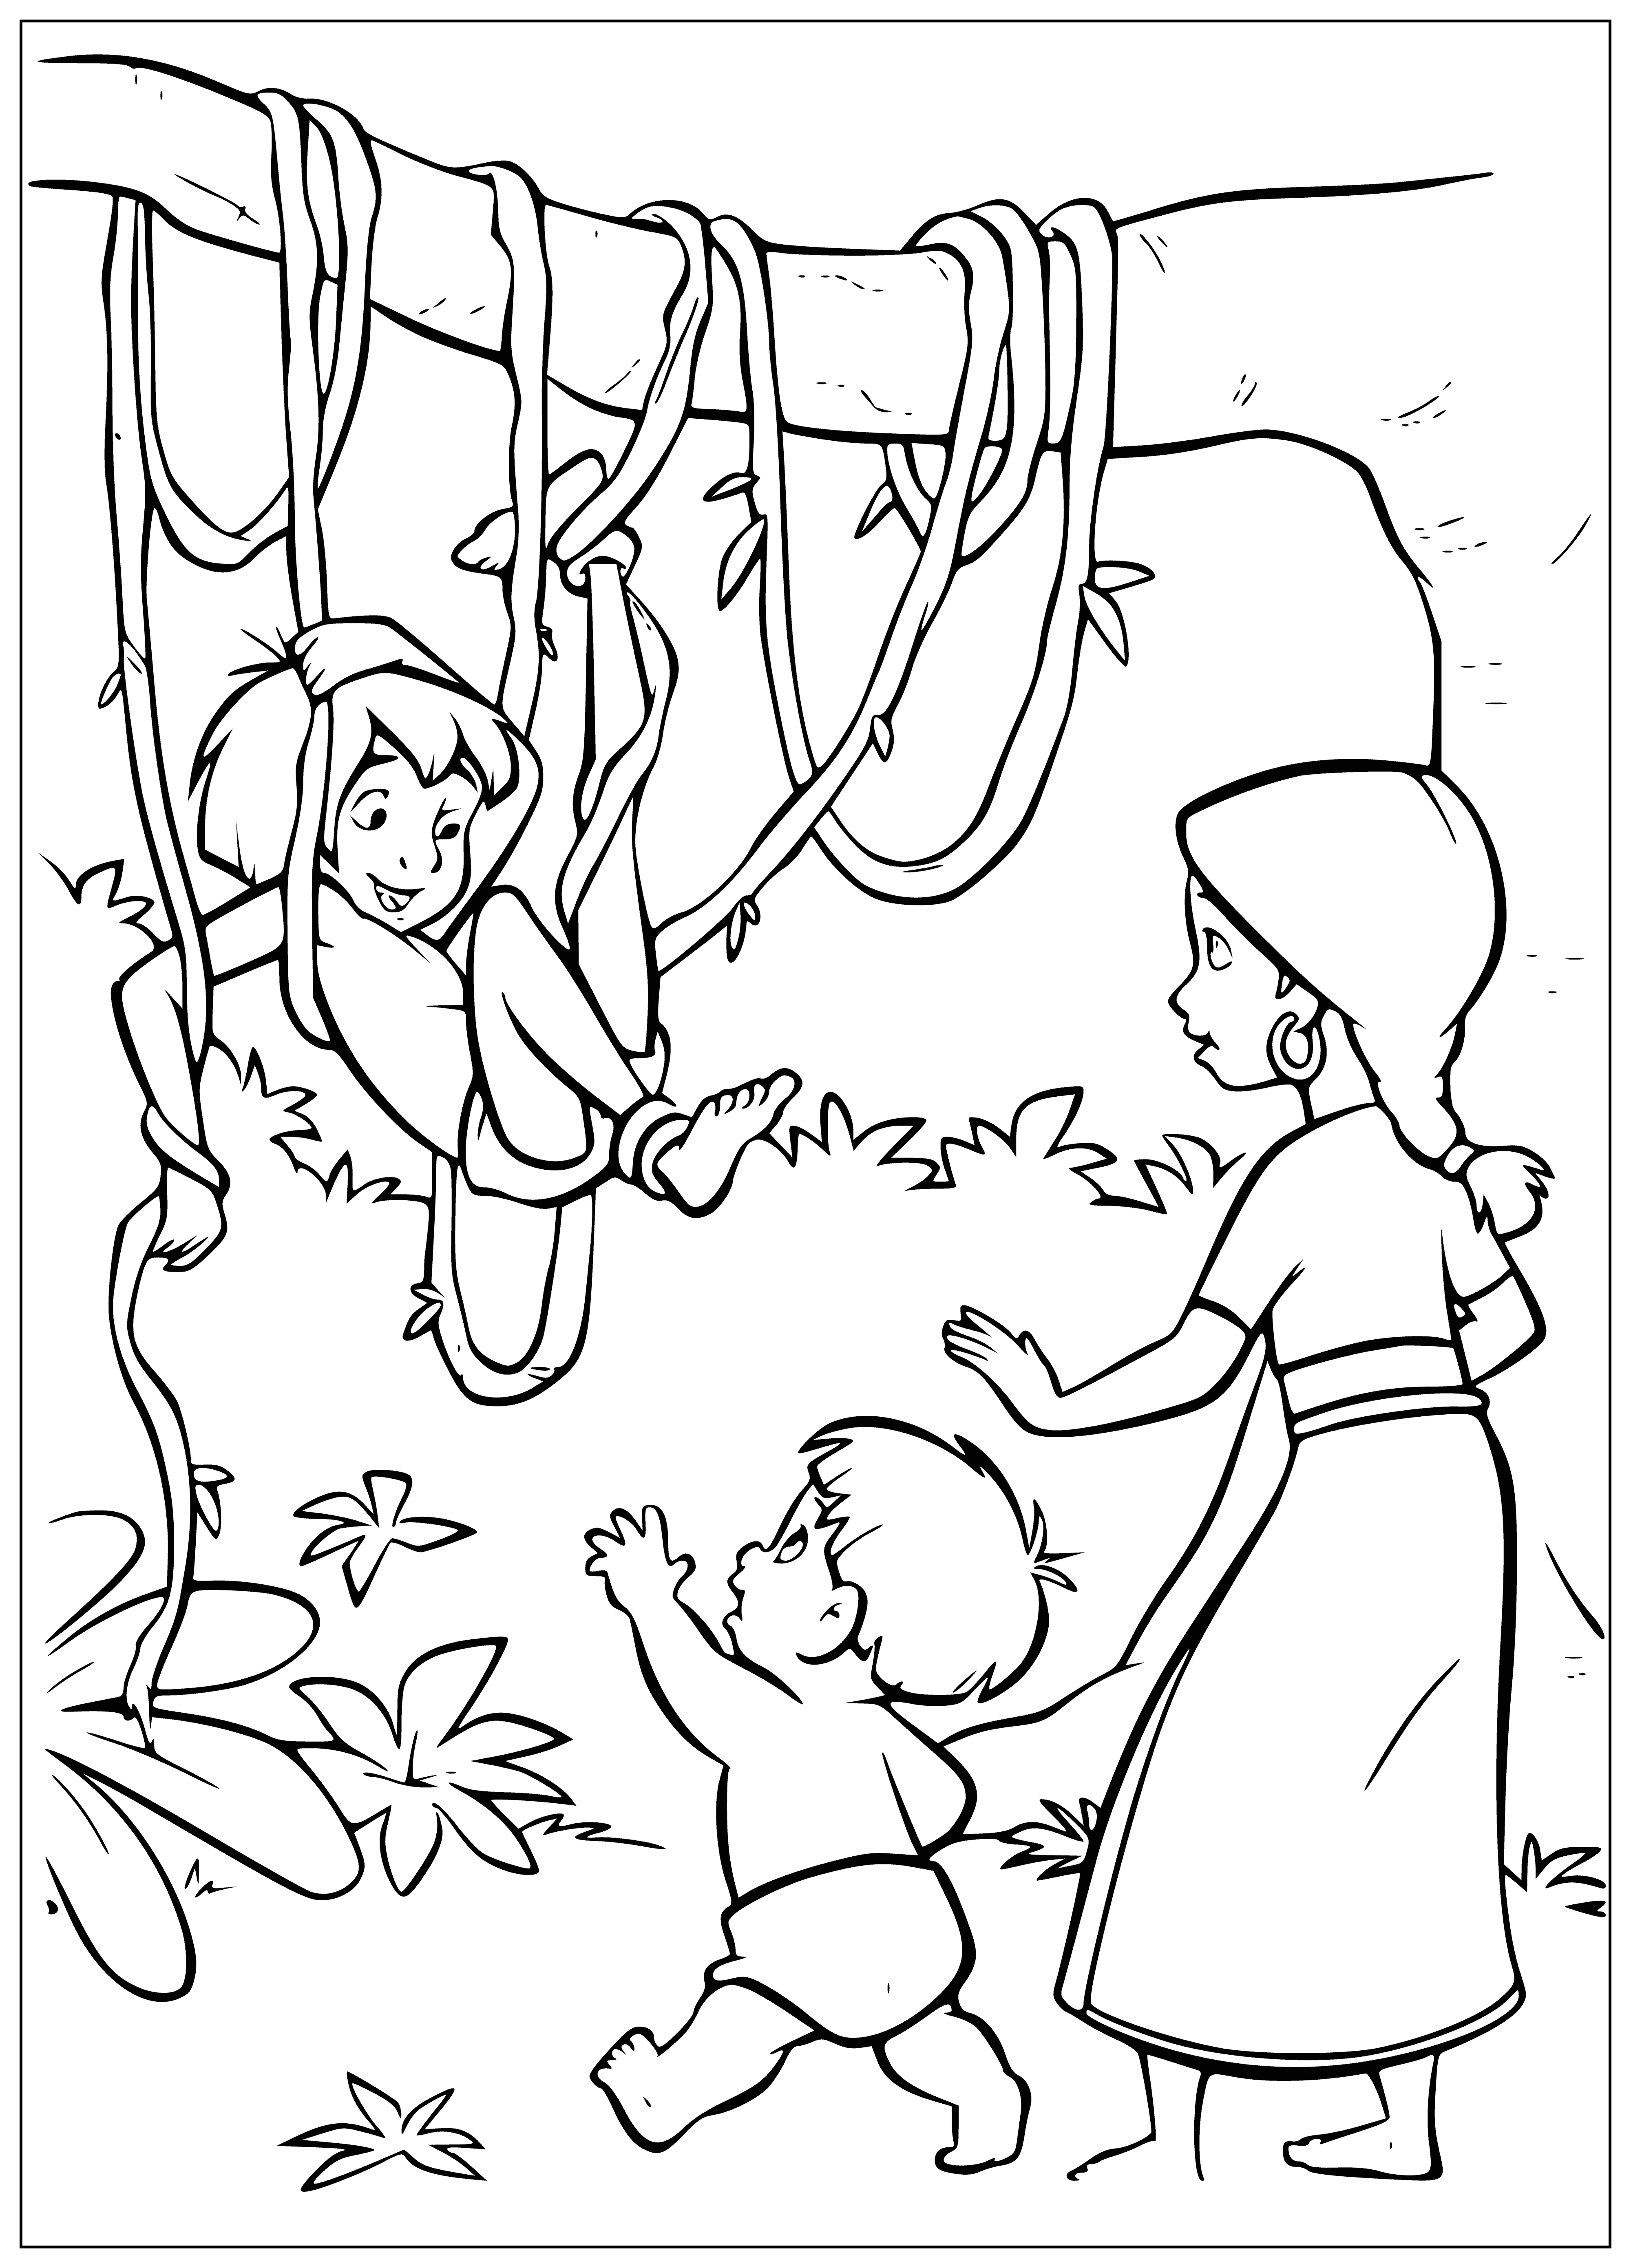 coloring page: Small boy stands in jungle clearing with tiger, snake, and monkey. He holds stick and there's a fire.